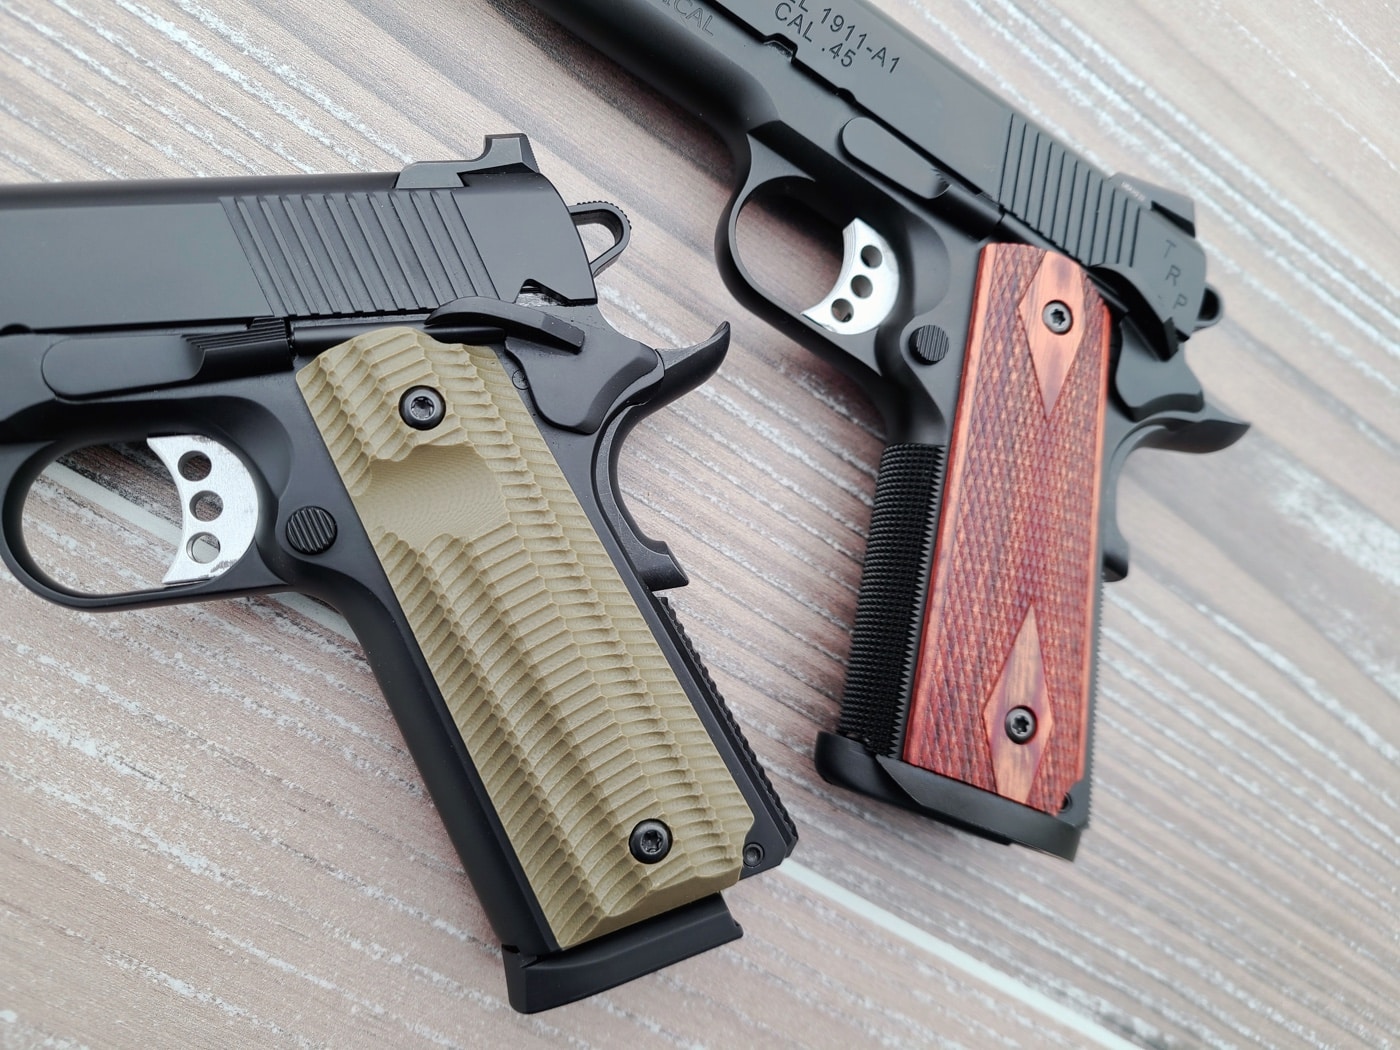 a comparison of the springfield operator and trp